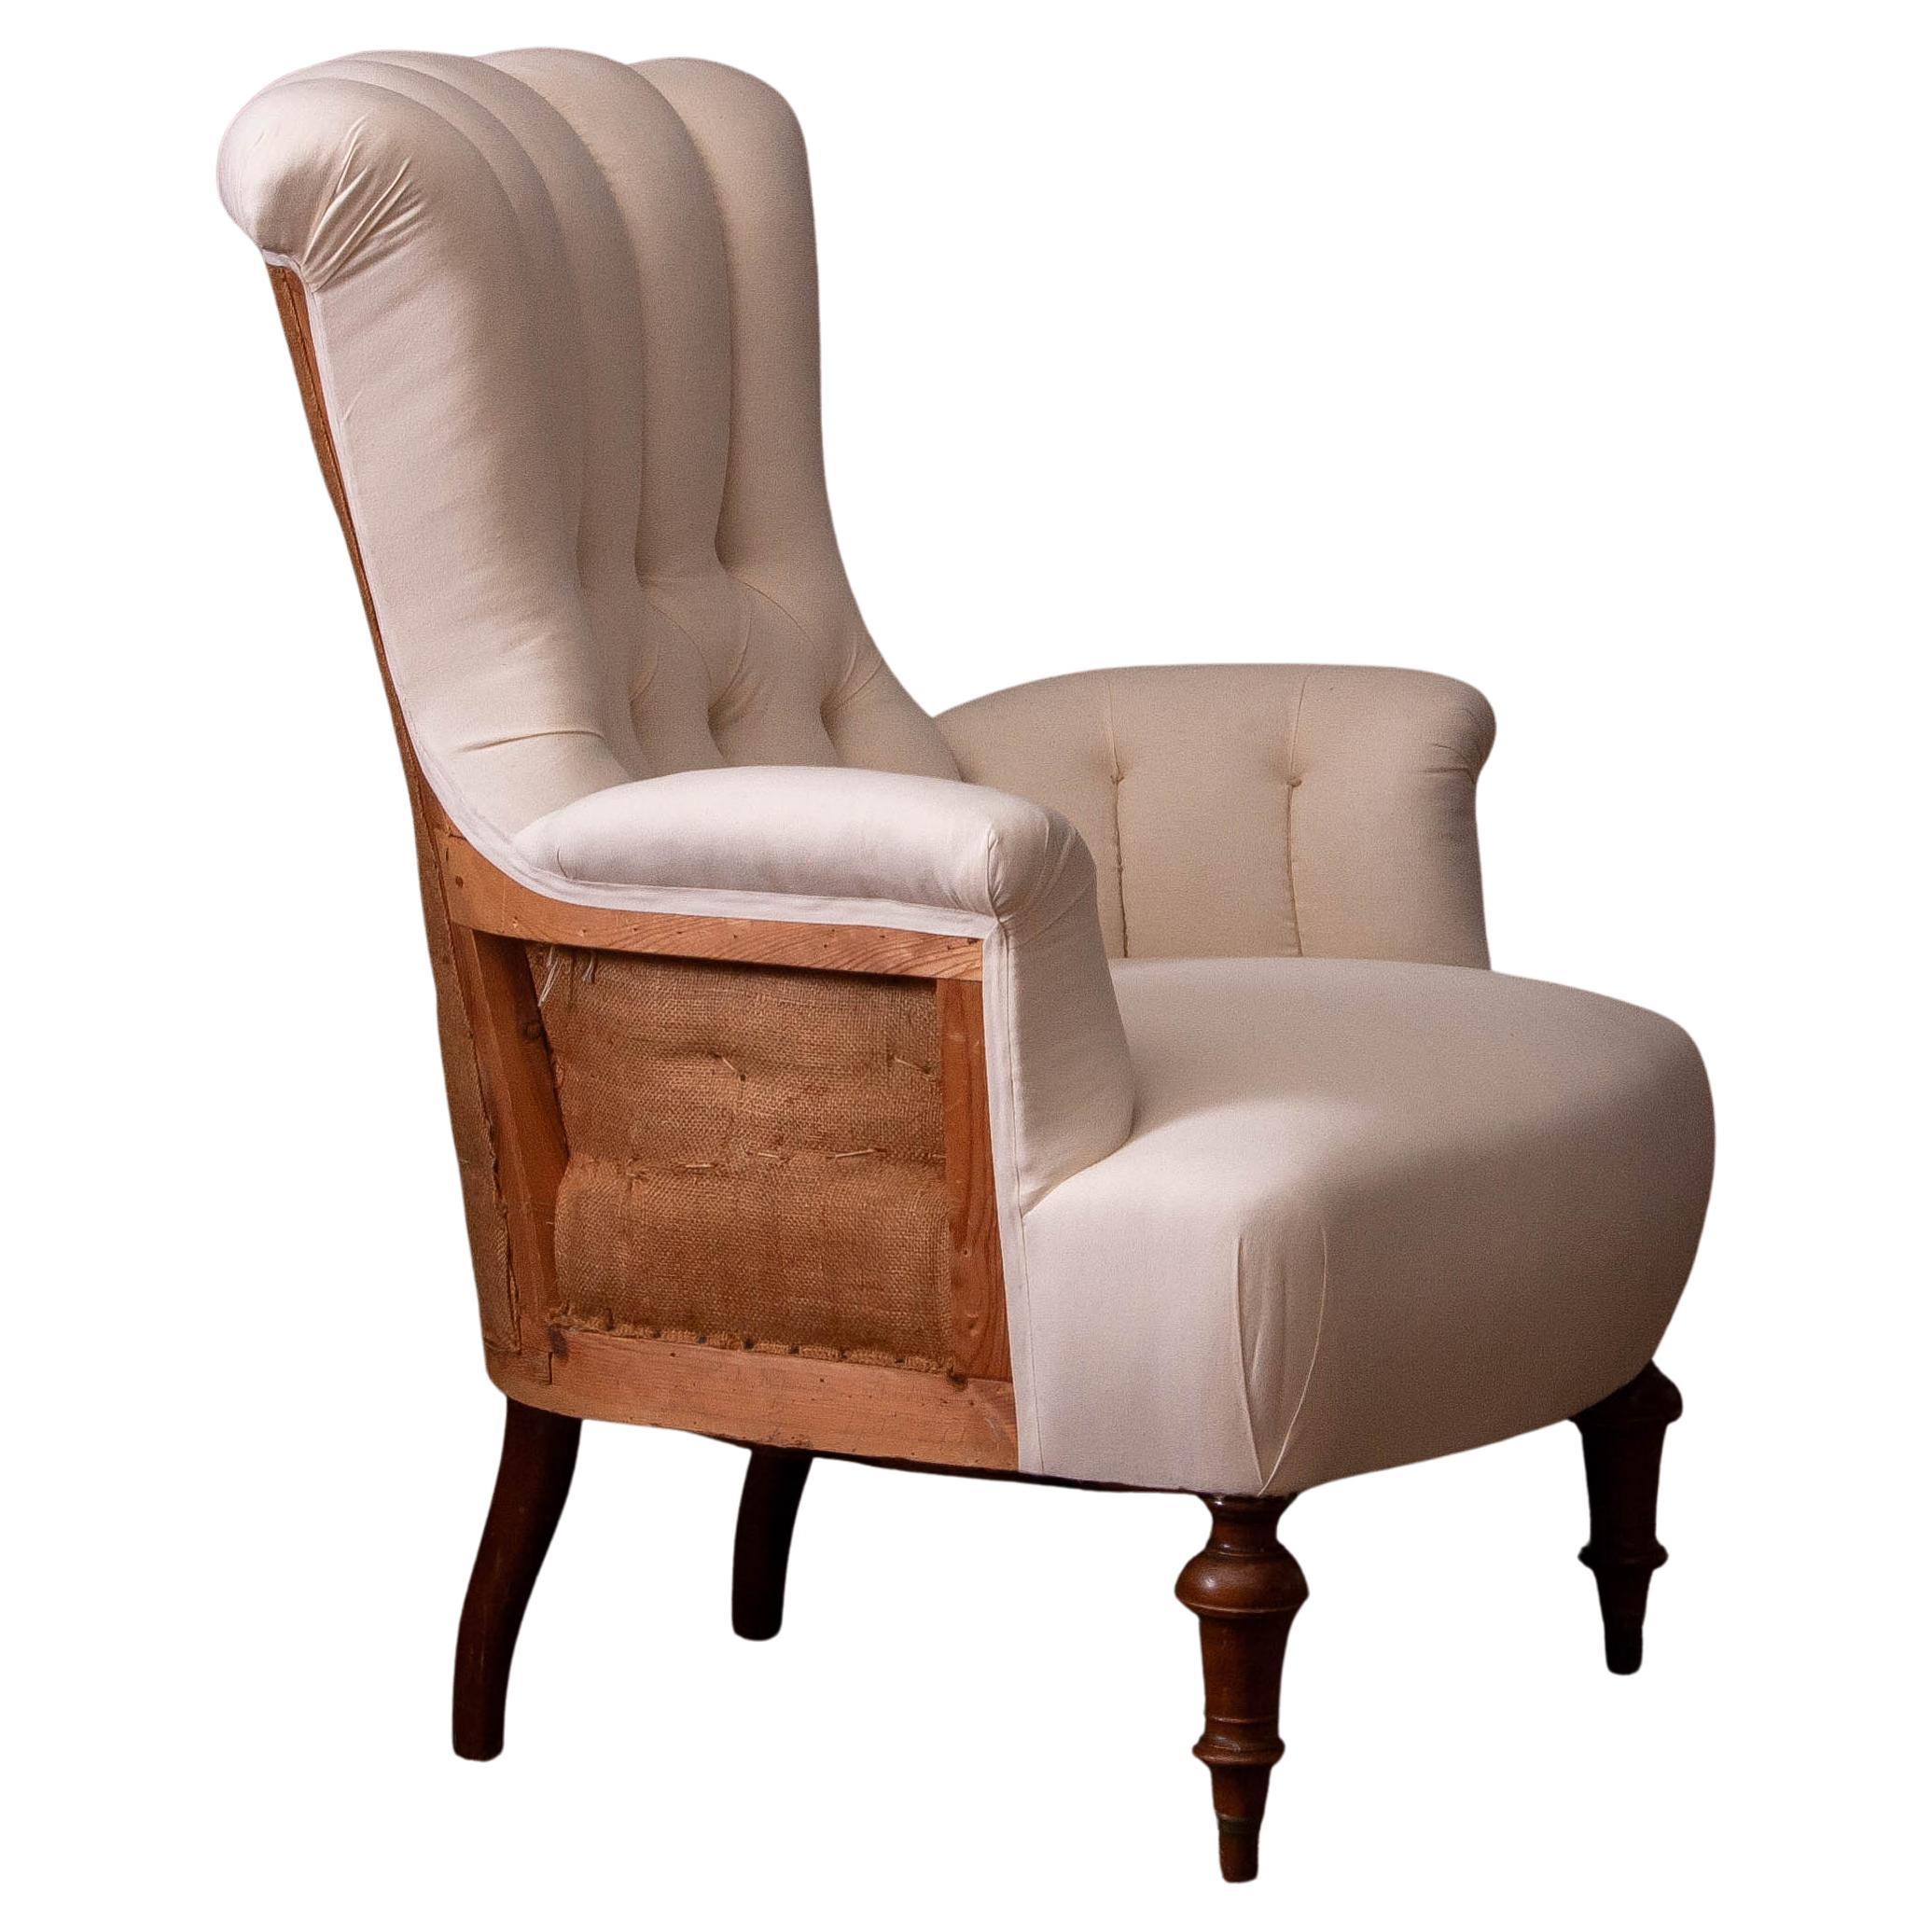 Absolutely beautiful original Victorian lounge chair, completely and professionally restored in 